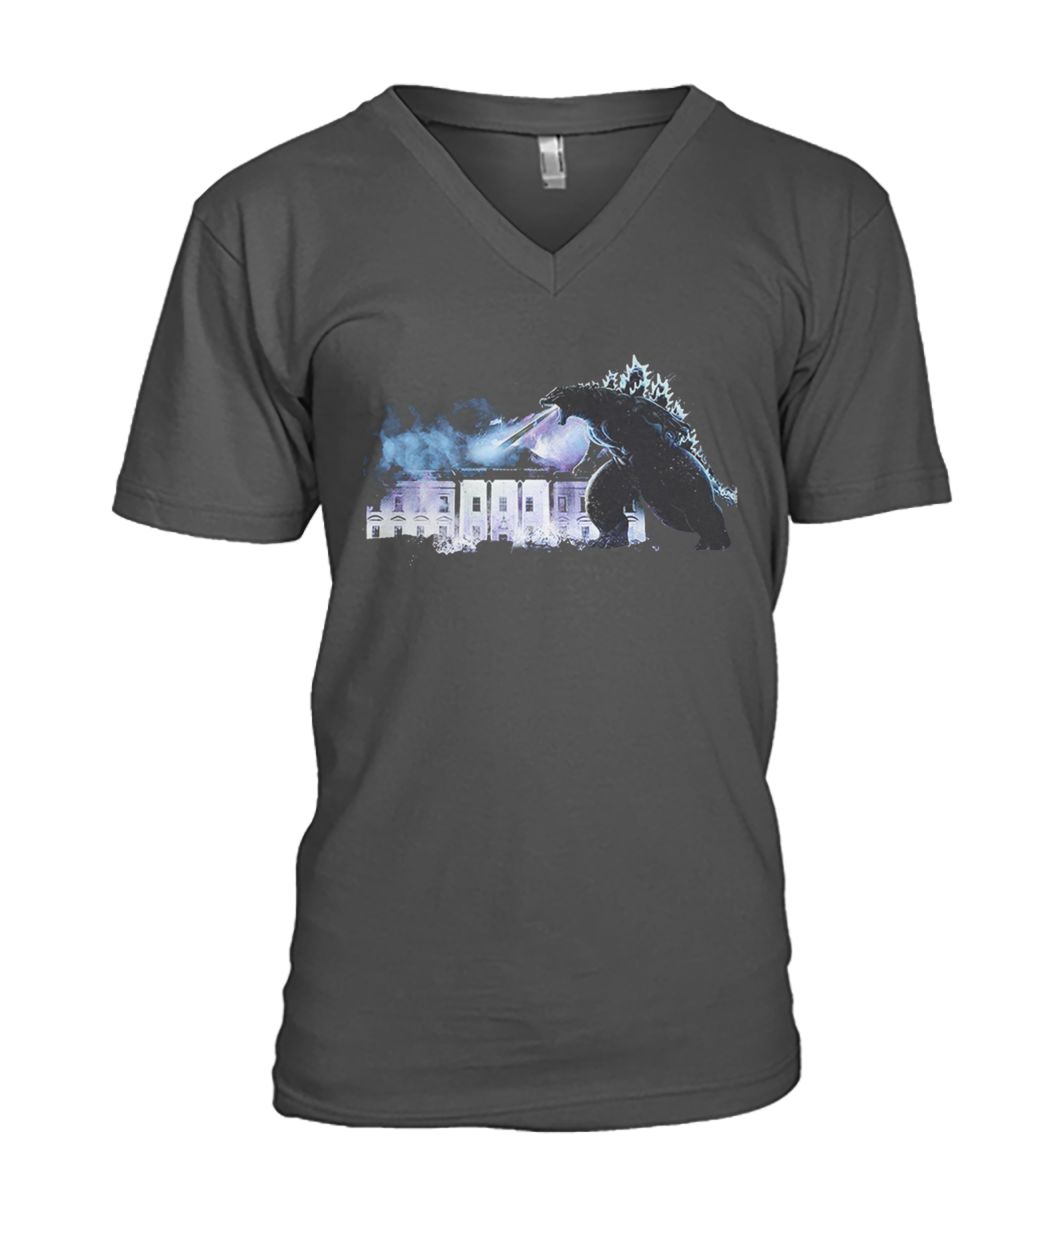 Godzilla atomic breath the white house king of the monsters mens v-neck